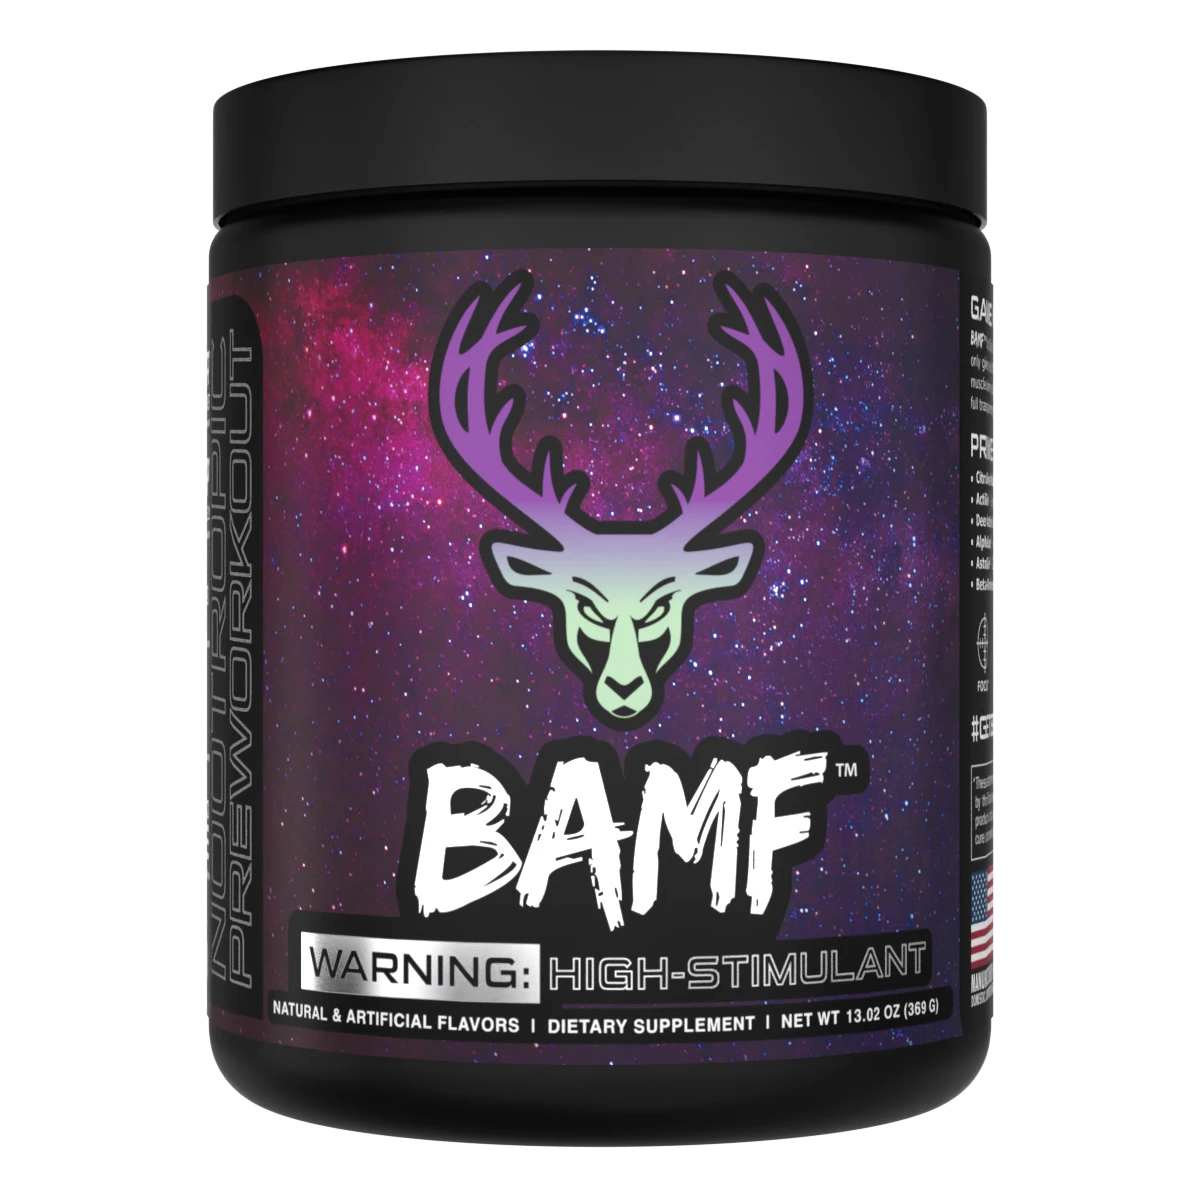 BAMF Pre-Workout by Bucked Up (DAS)